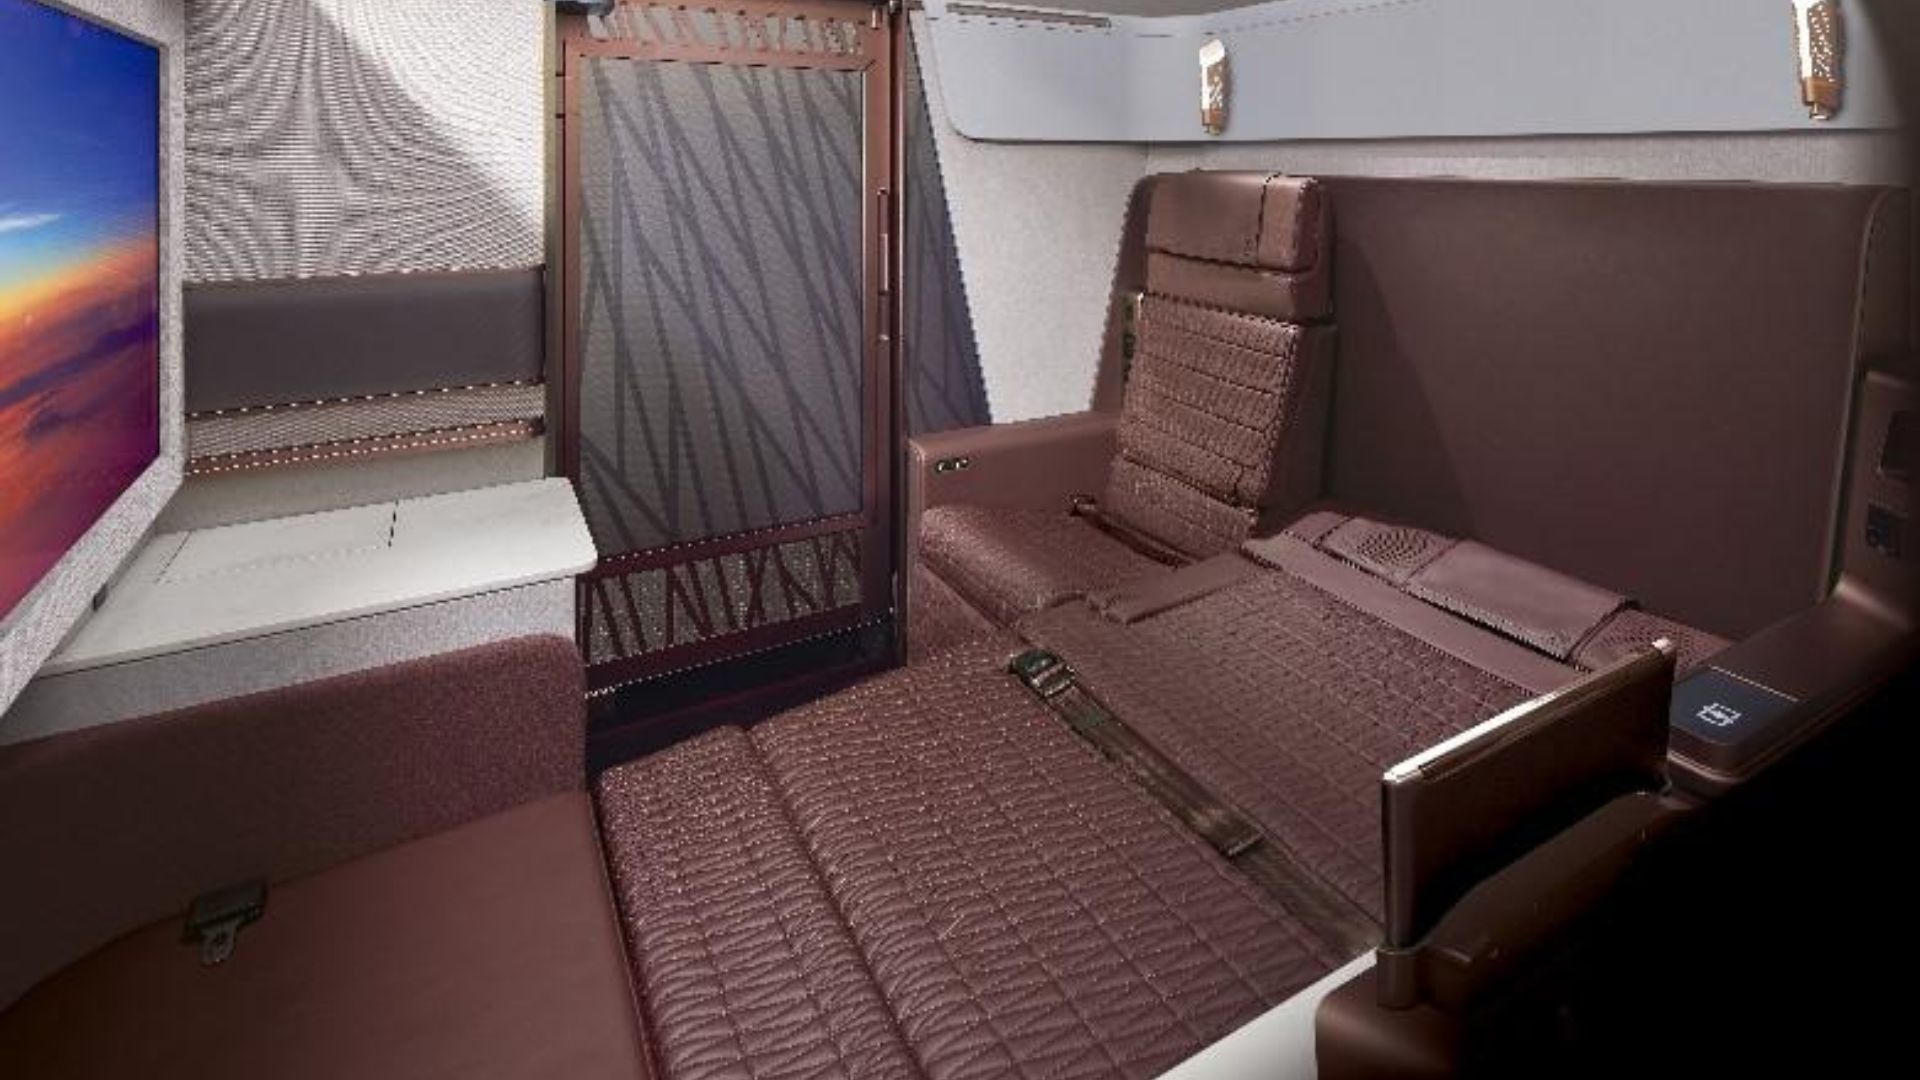 Japan Airlines Unveils Luxurious First Class Cabins On New Aircraft